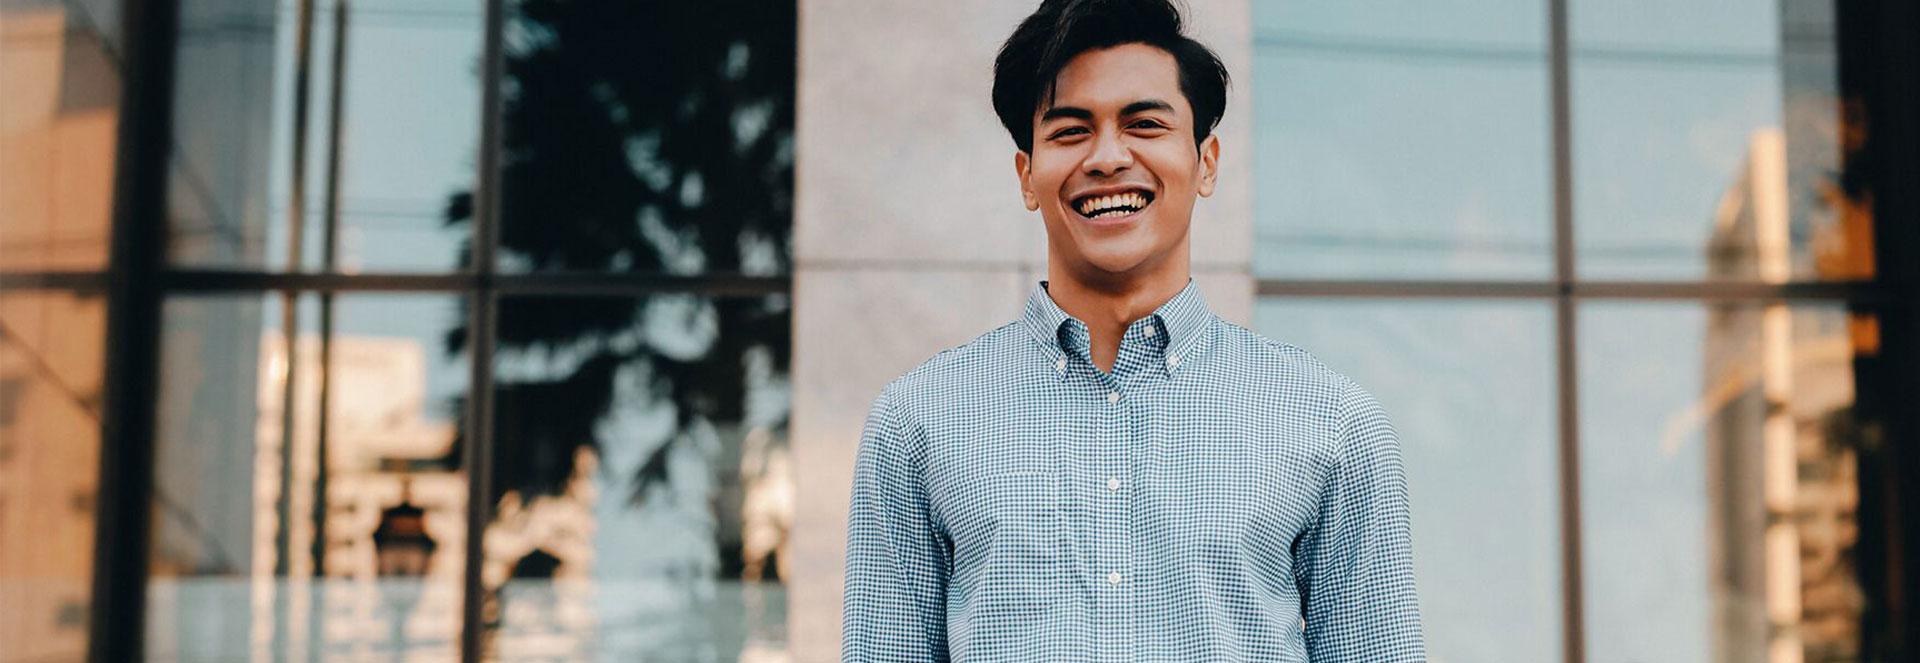 Young man in blue button-up shirt standing in front of an office building with a big smile